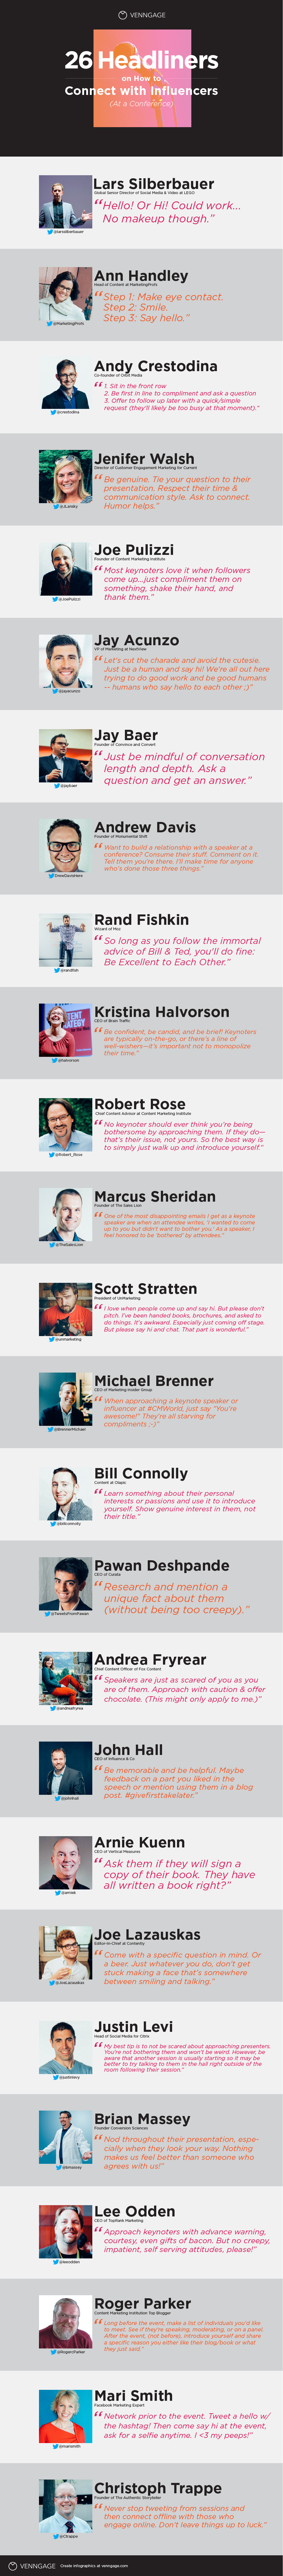 How to Connect with Influencers at Conferences [INFOGRAPHIC]